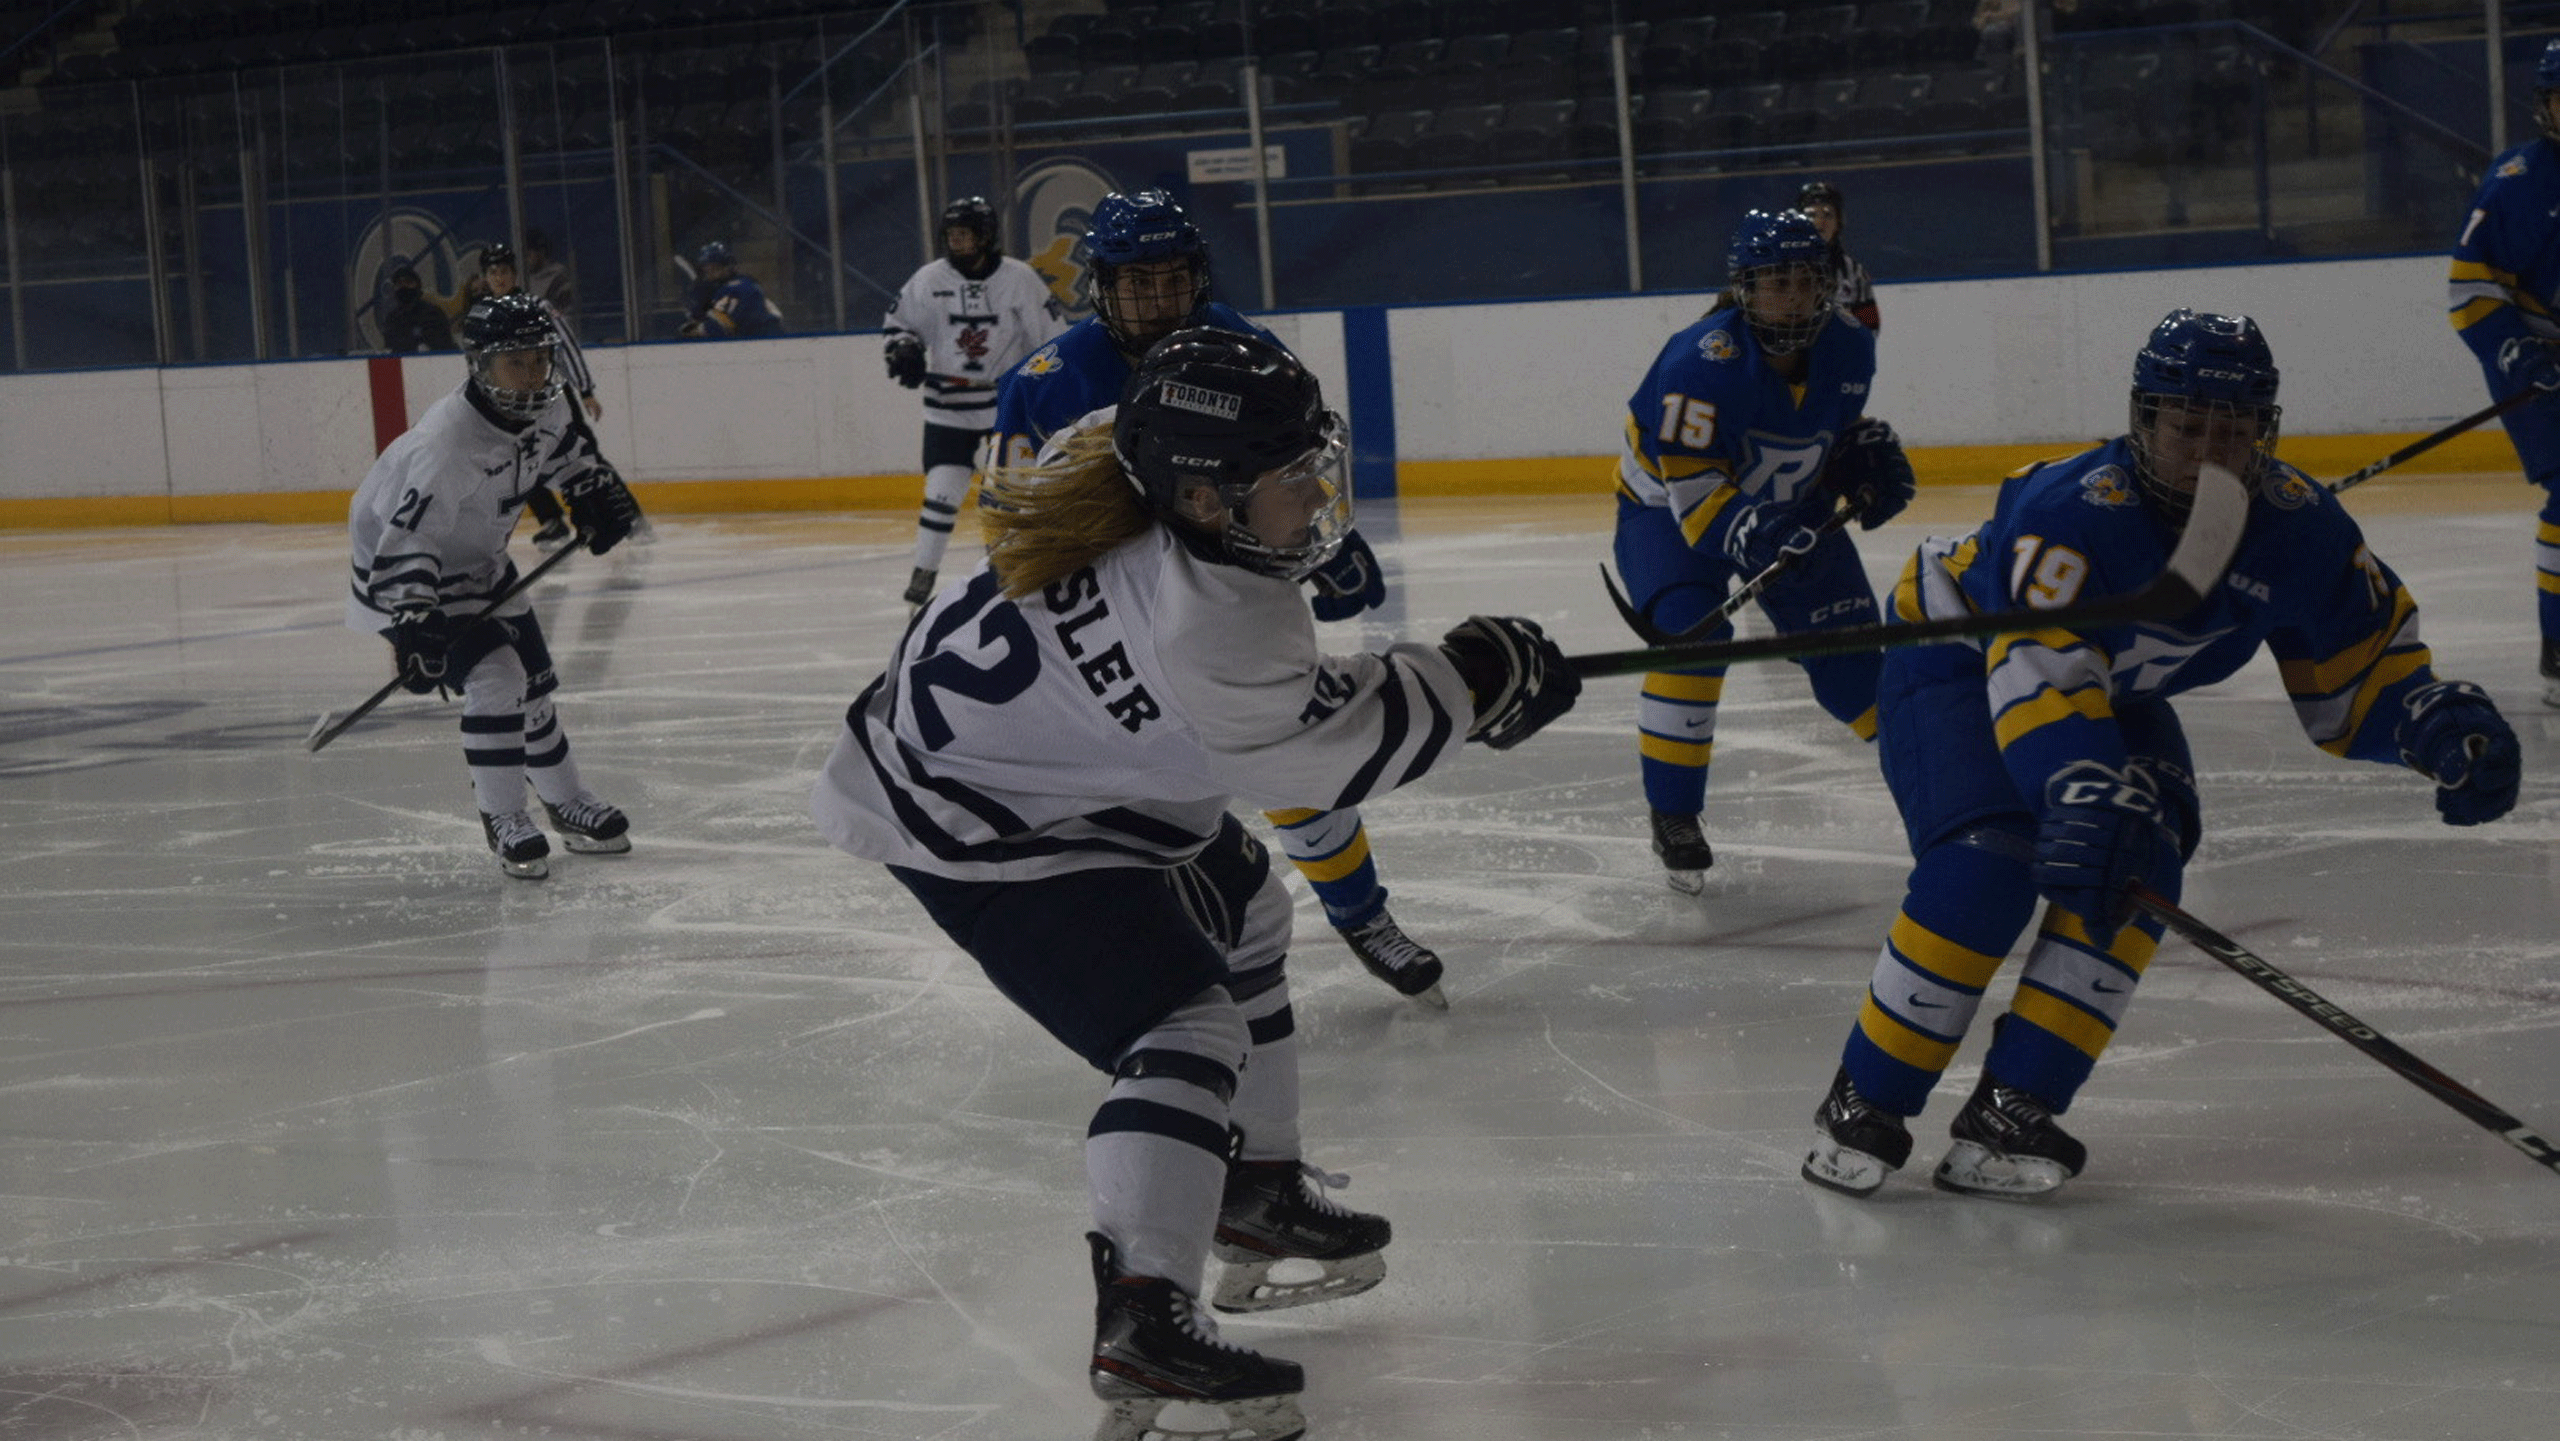 A U of T skater in a white jersey is closely defend by Rams players in blue jerseys